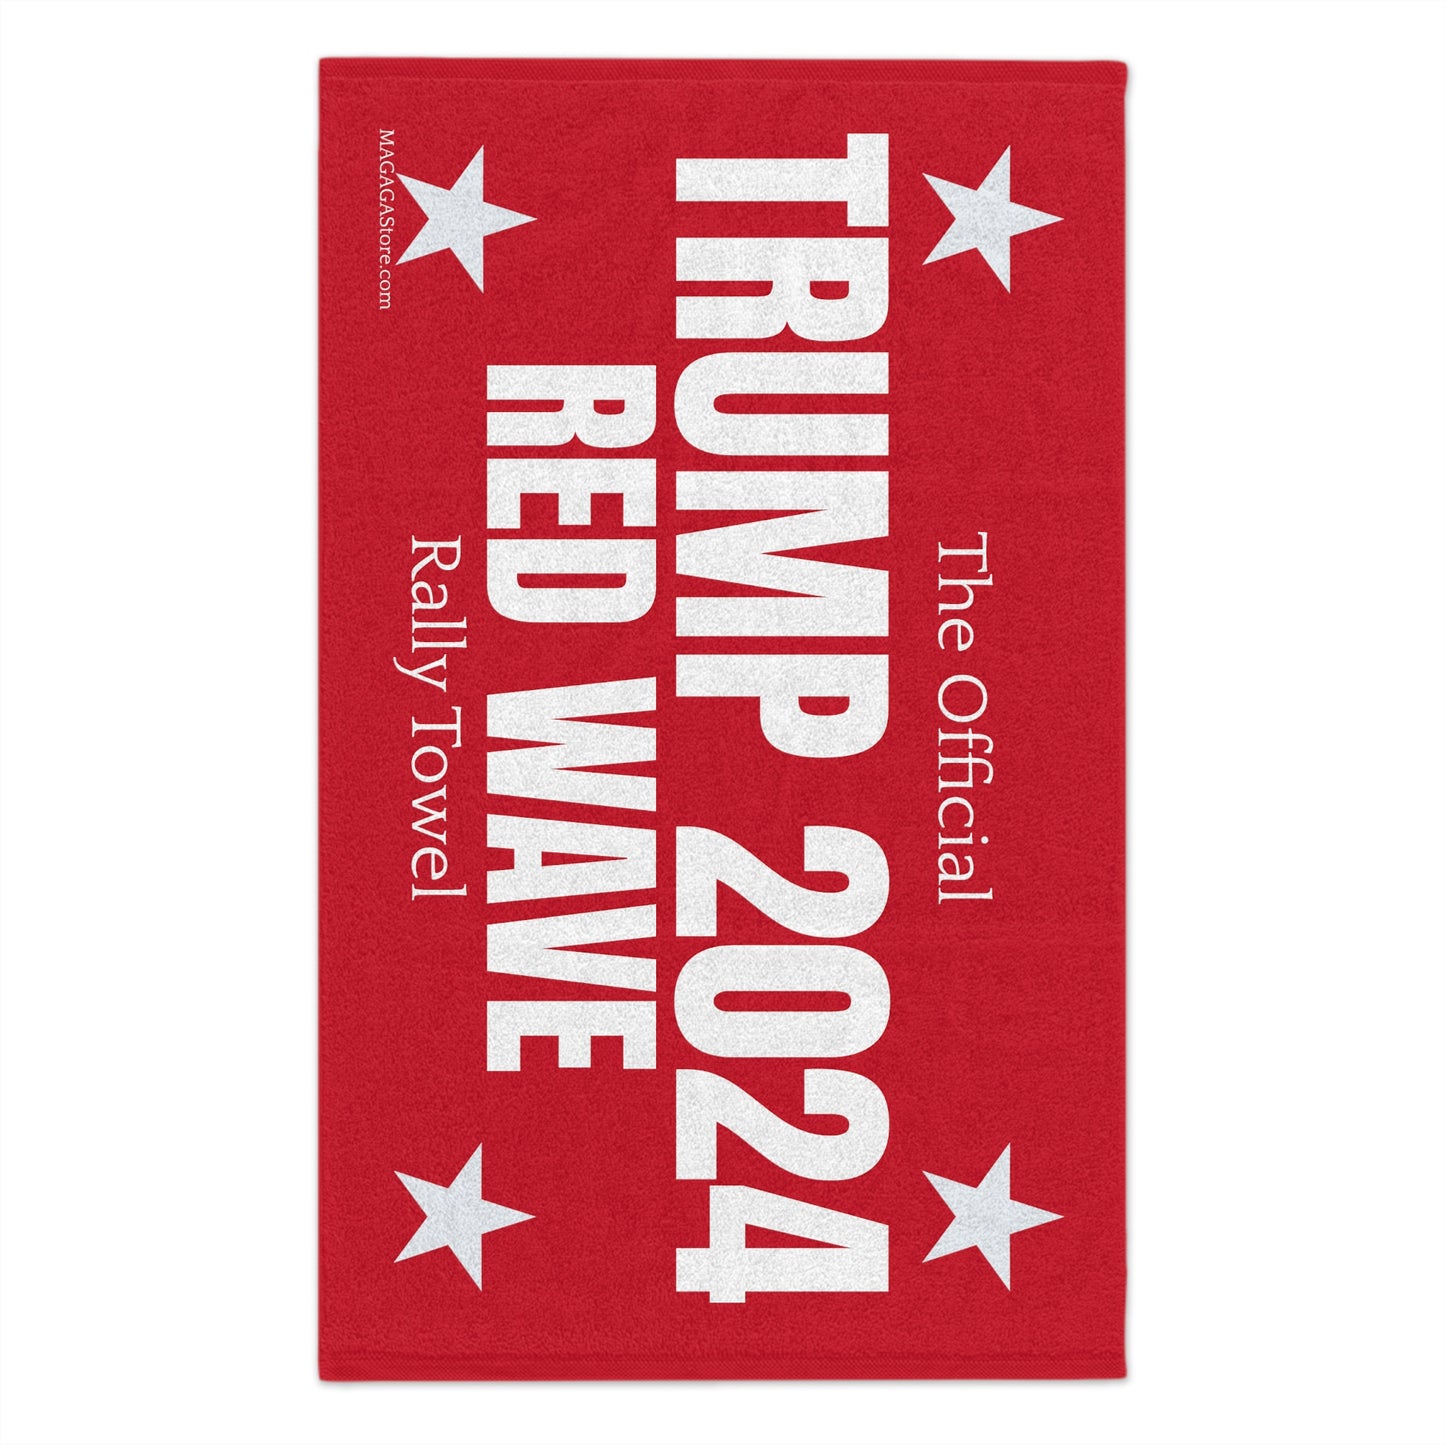 The OFFICIAL Trump 2024 Red Wave Rally Towel MAGA Over 10000 sold